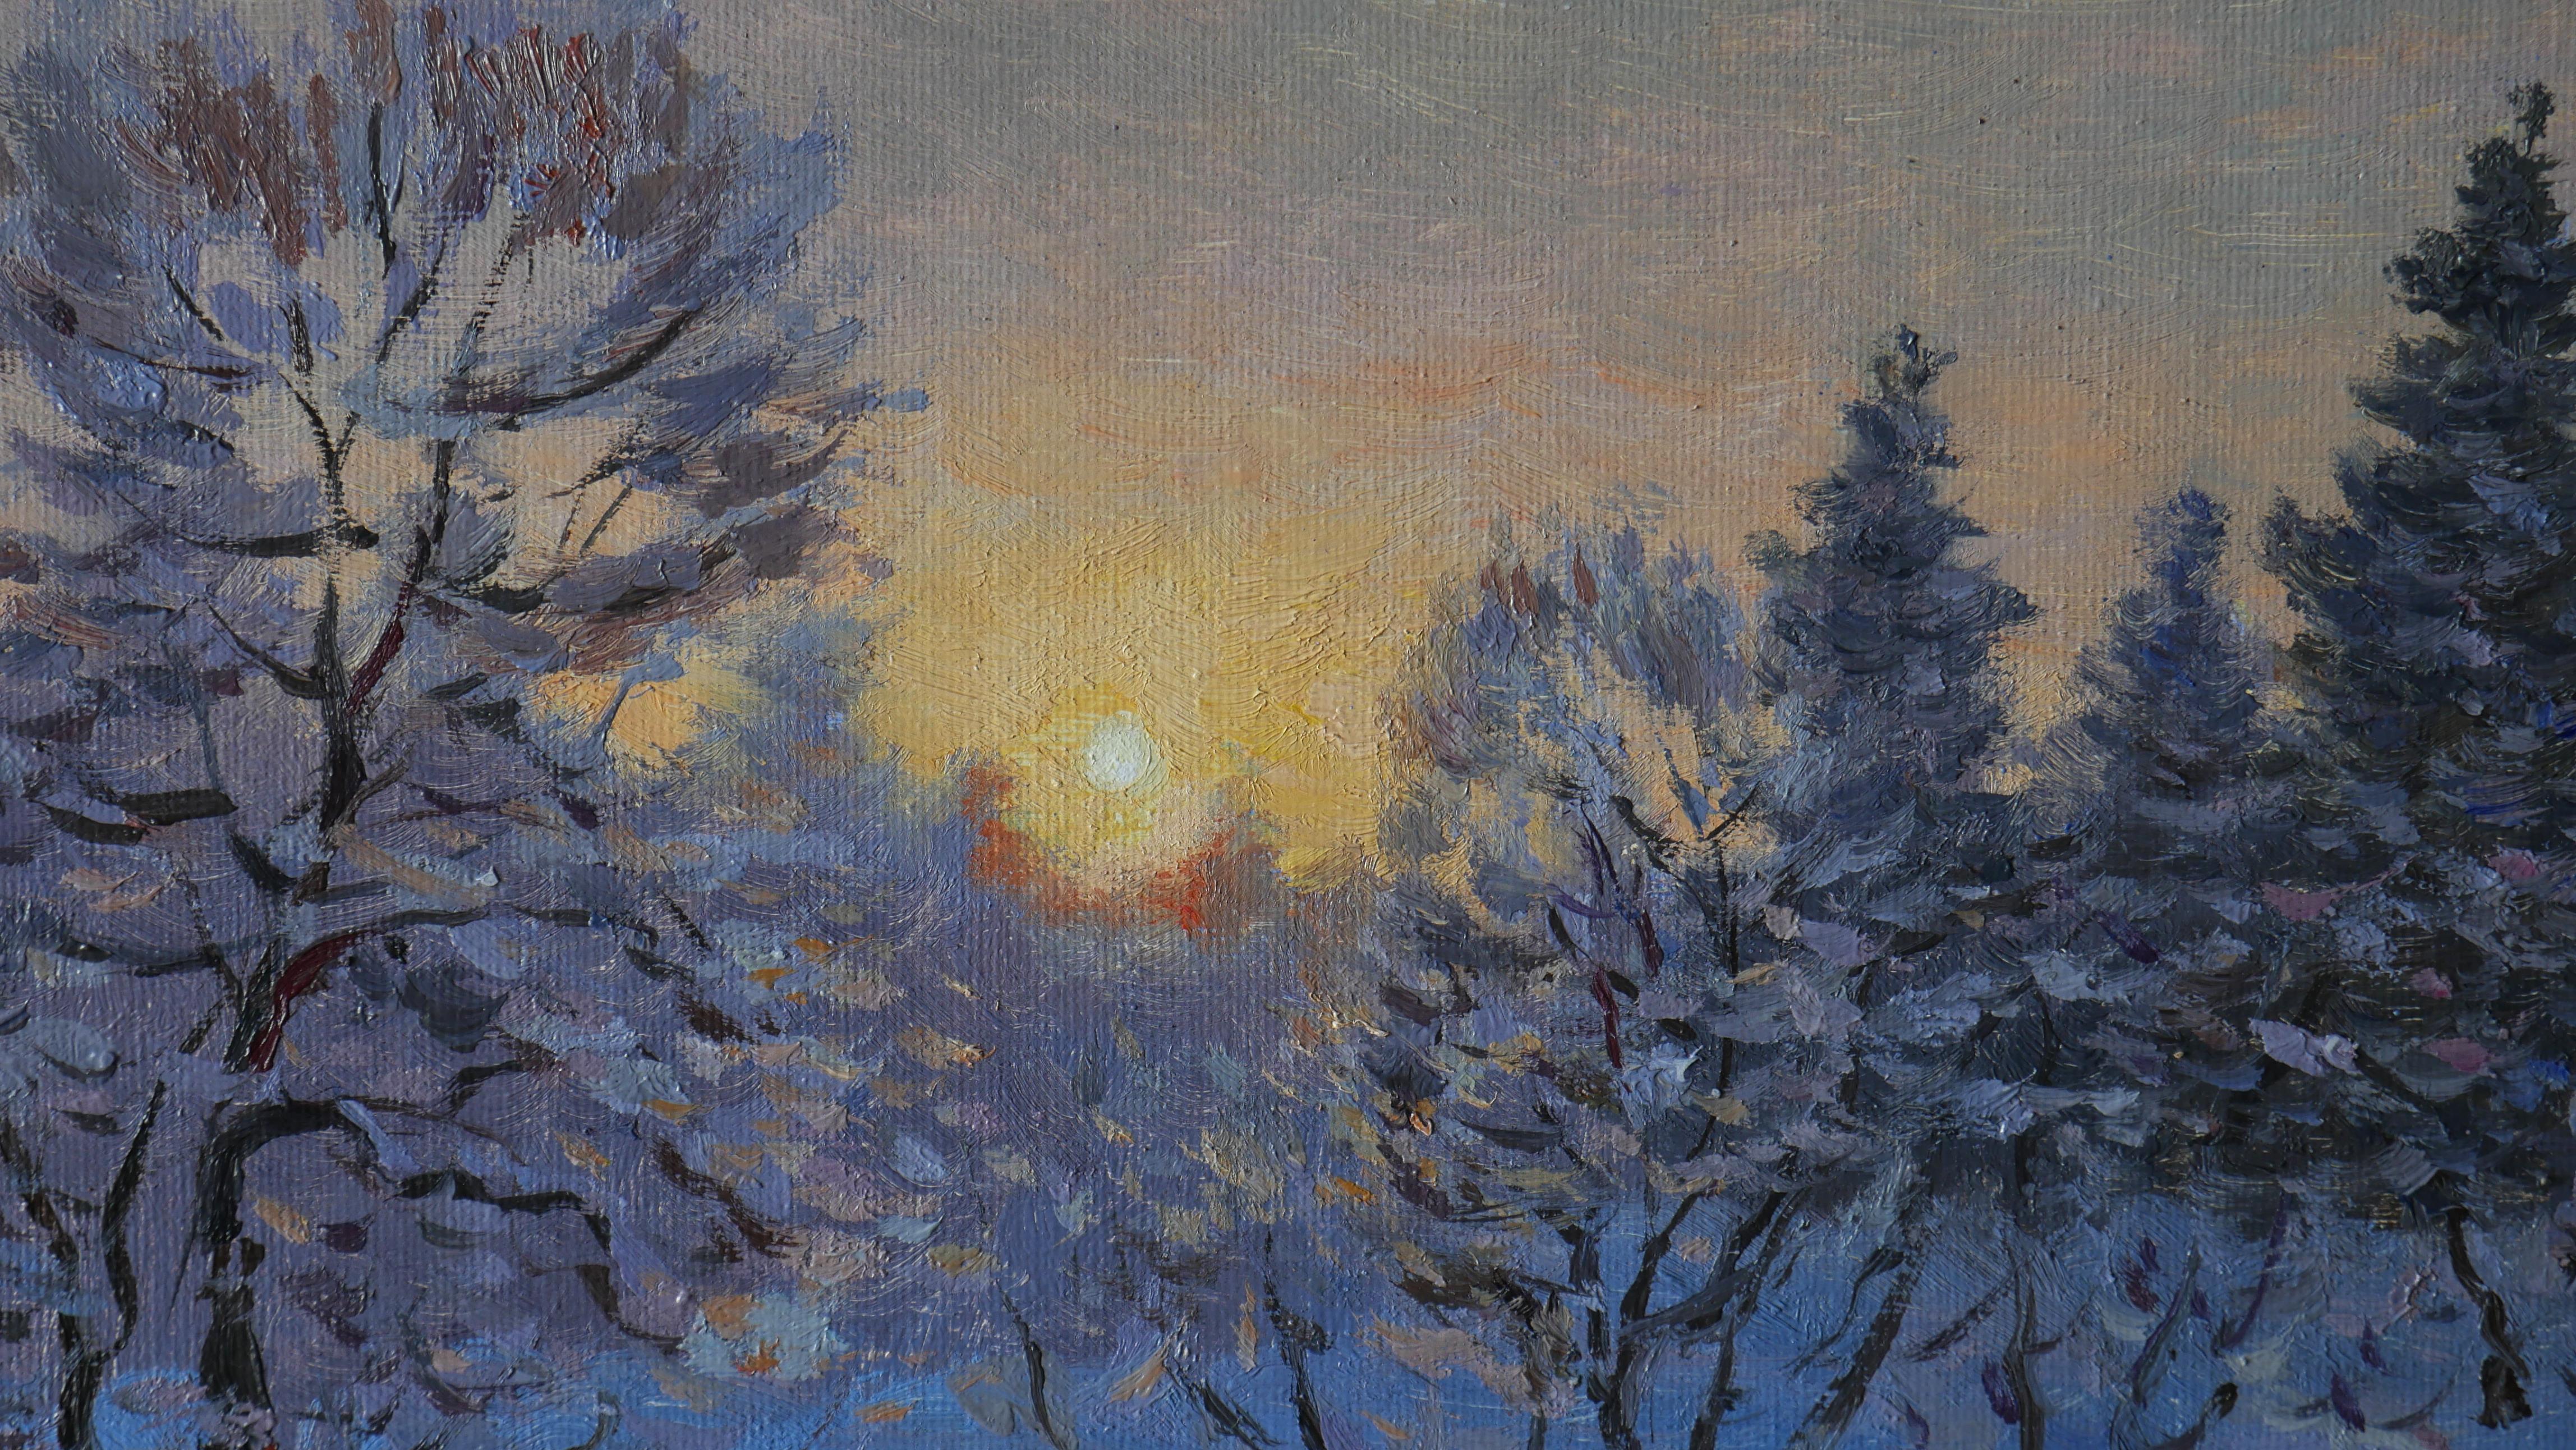 Winter evenings are momentary state of nature. But if there is the opportunity Nikolay tries to do his best to capture them. It was one of the coldest evenings ever. The artist was inspired by the last warm rays of the Sun when they touched the cold